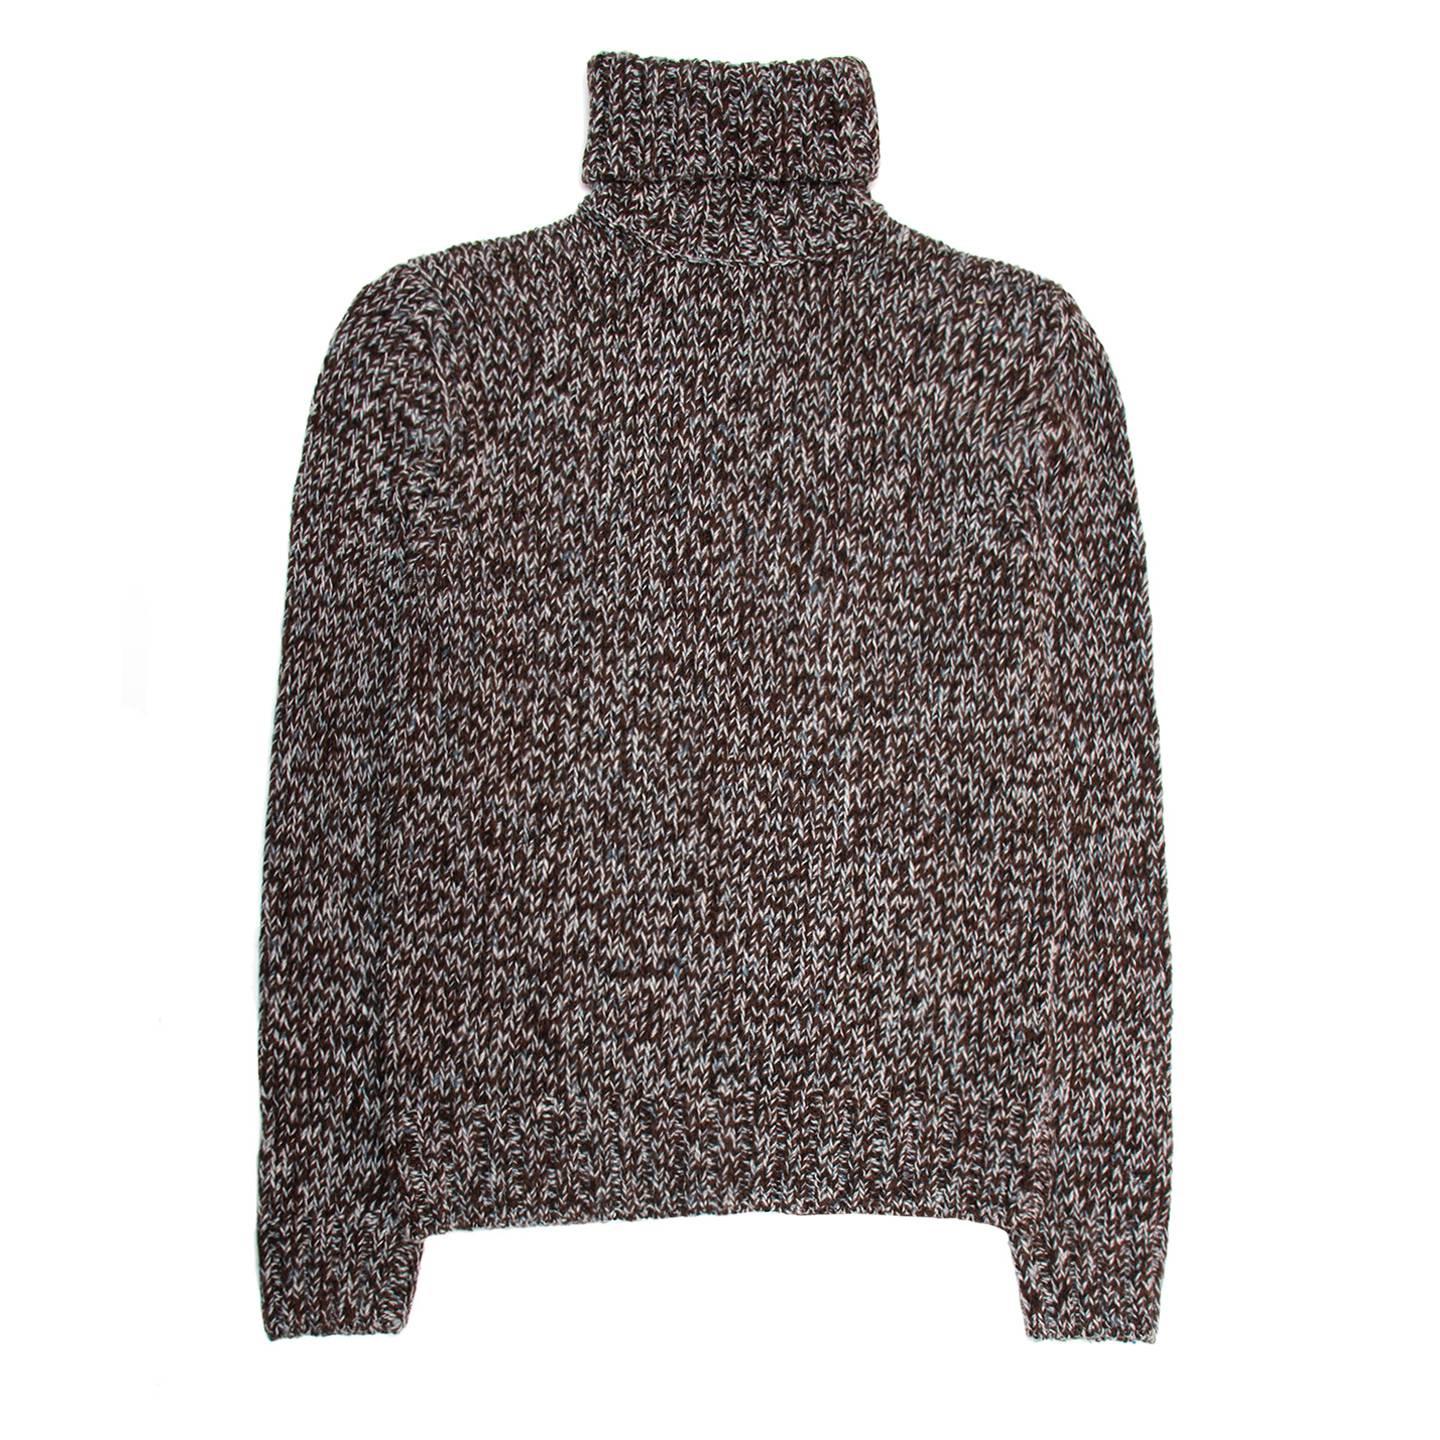 Melange of brown, navy and sky blue turtleneck pullover of broad weaved cashmere, yack and wool yarns. Made in France. Made for man worn by women. Purchased in Amsterdam.

Size  M Universal sizing

Condition  Excellent: worn once